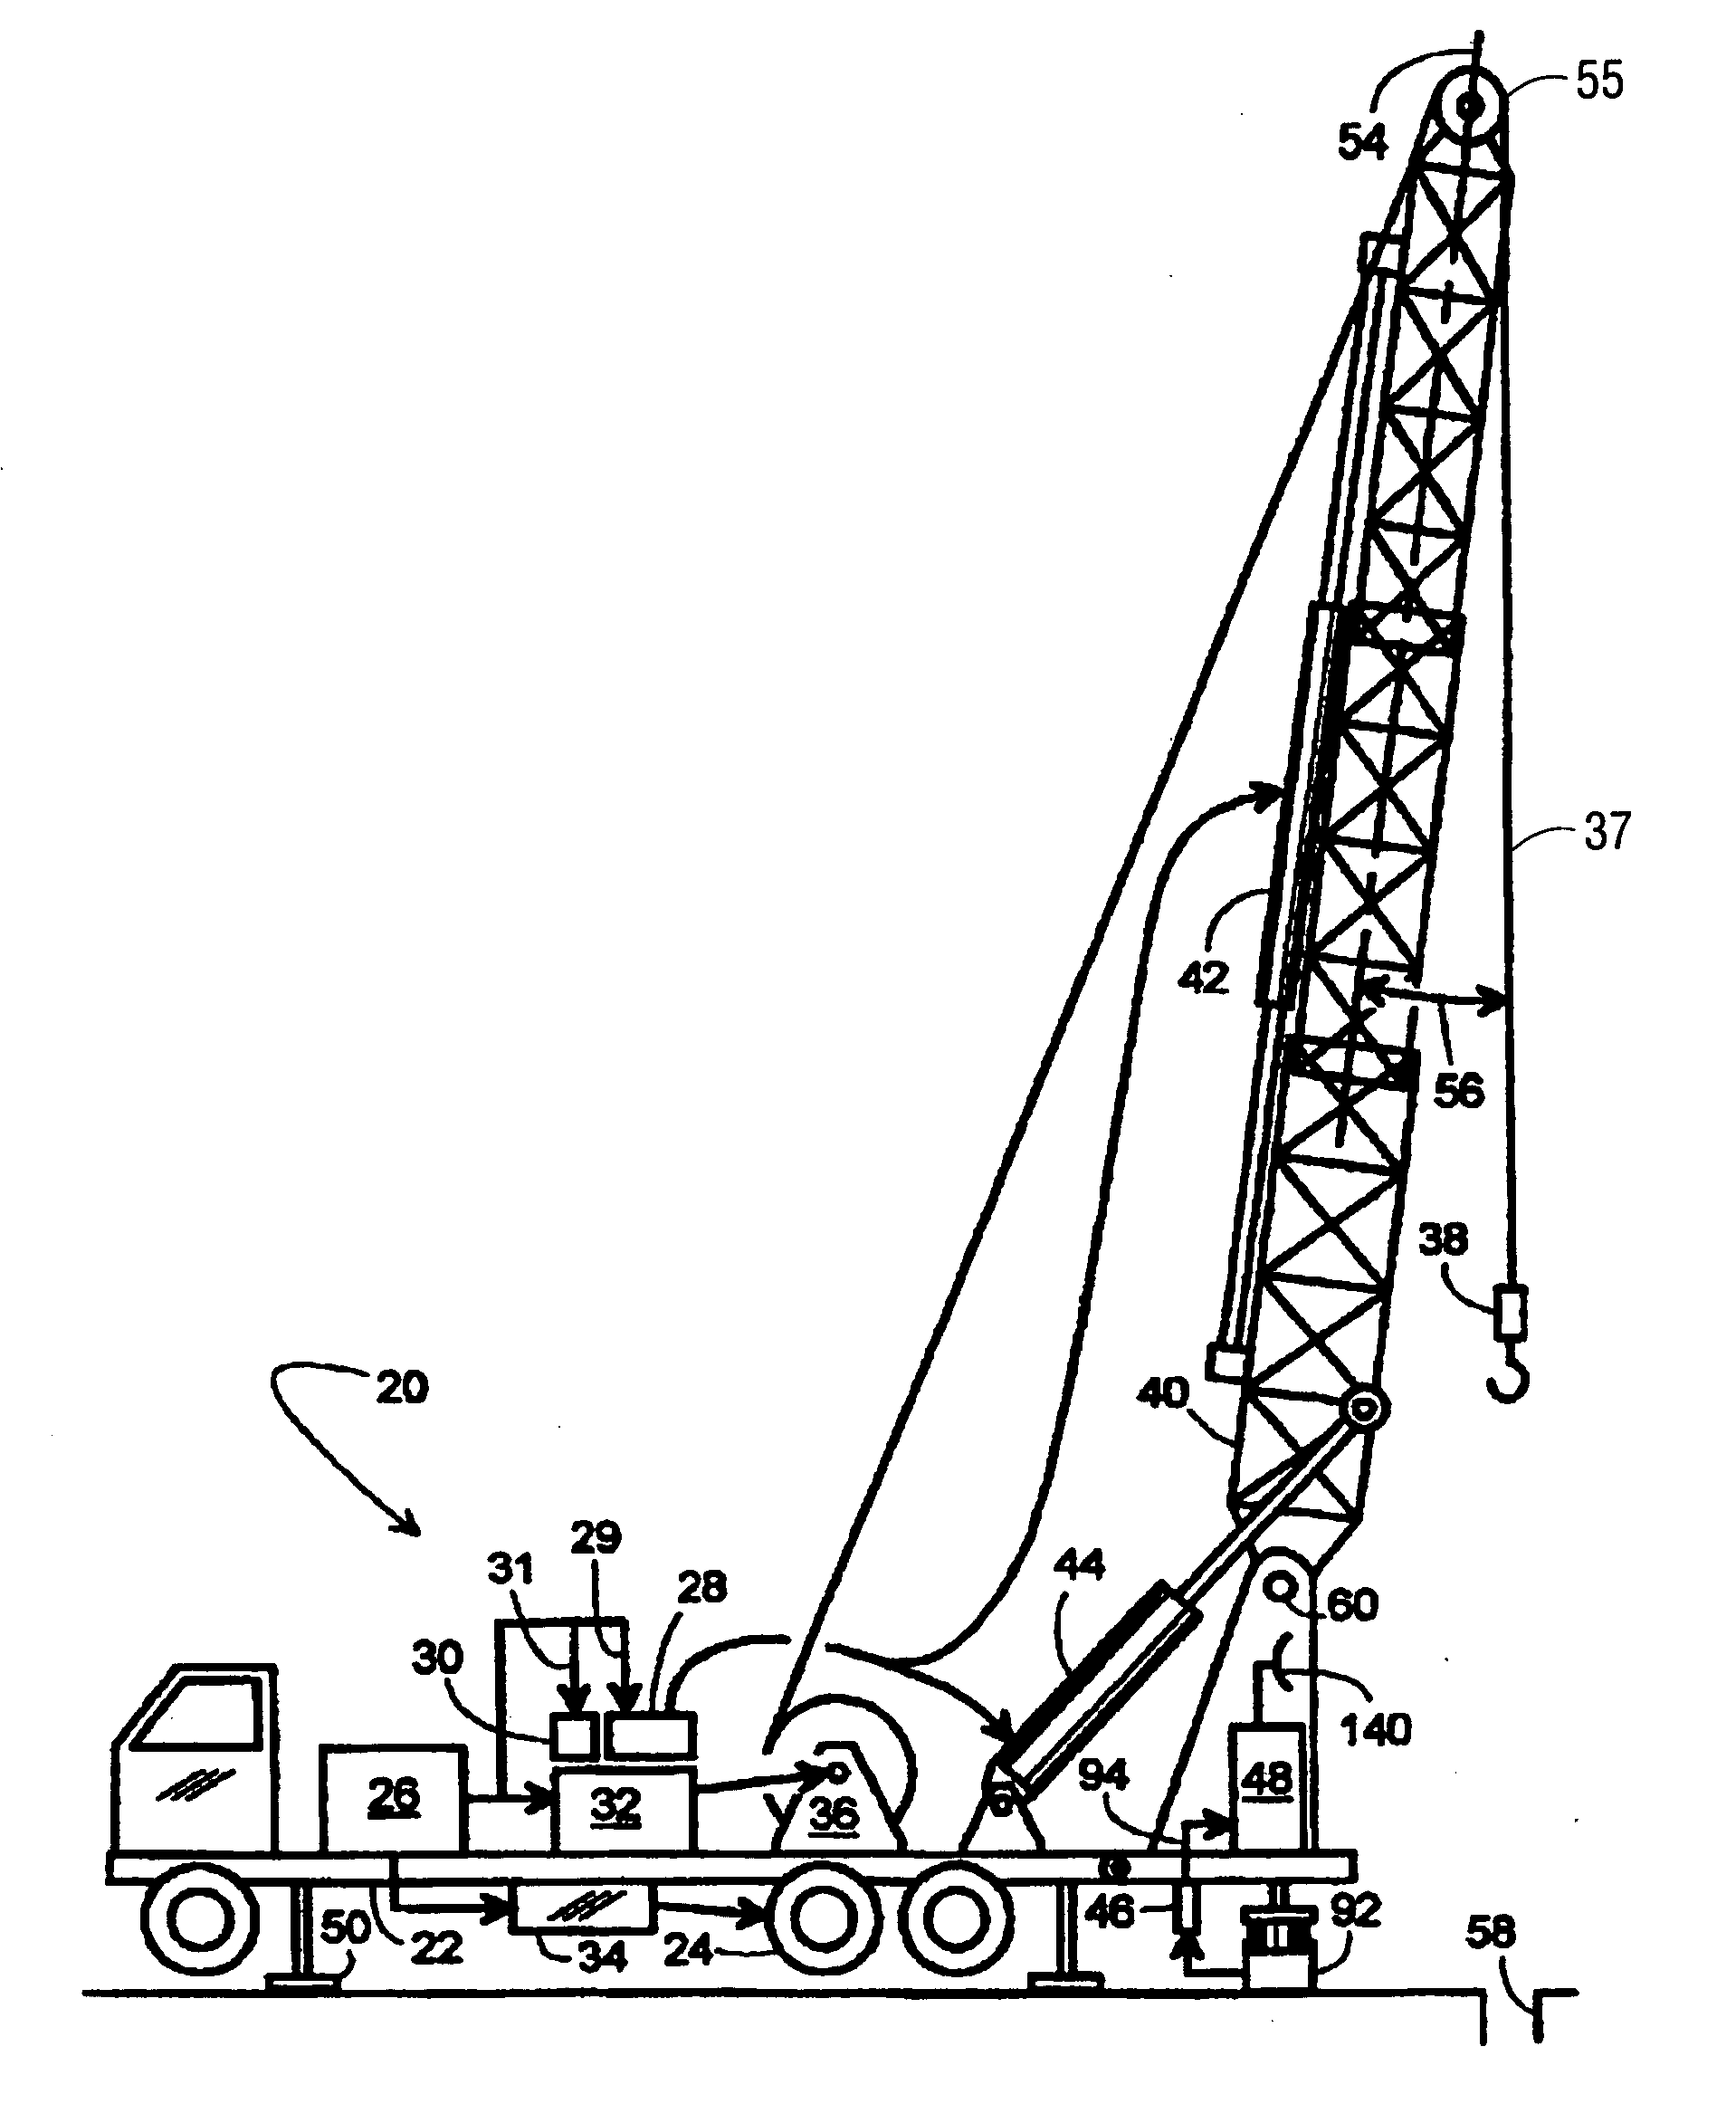 System for assuring engagement of a hydromatic brake on a drilling or well service rig